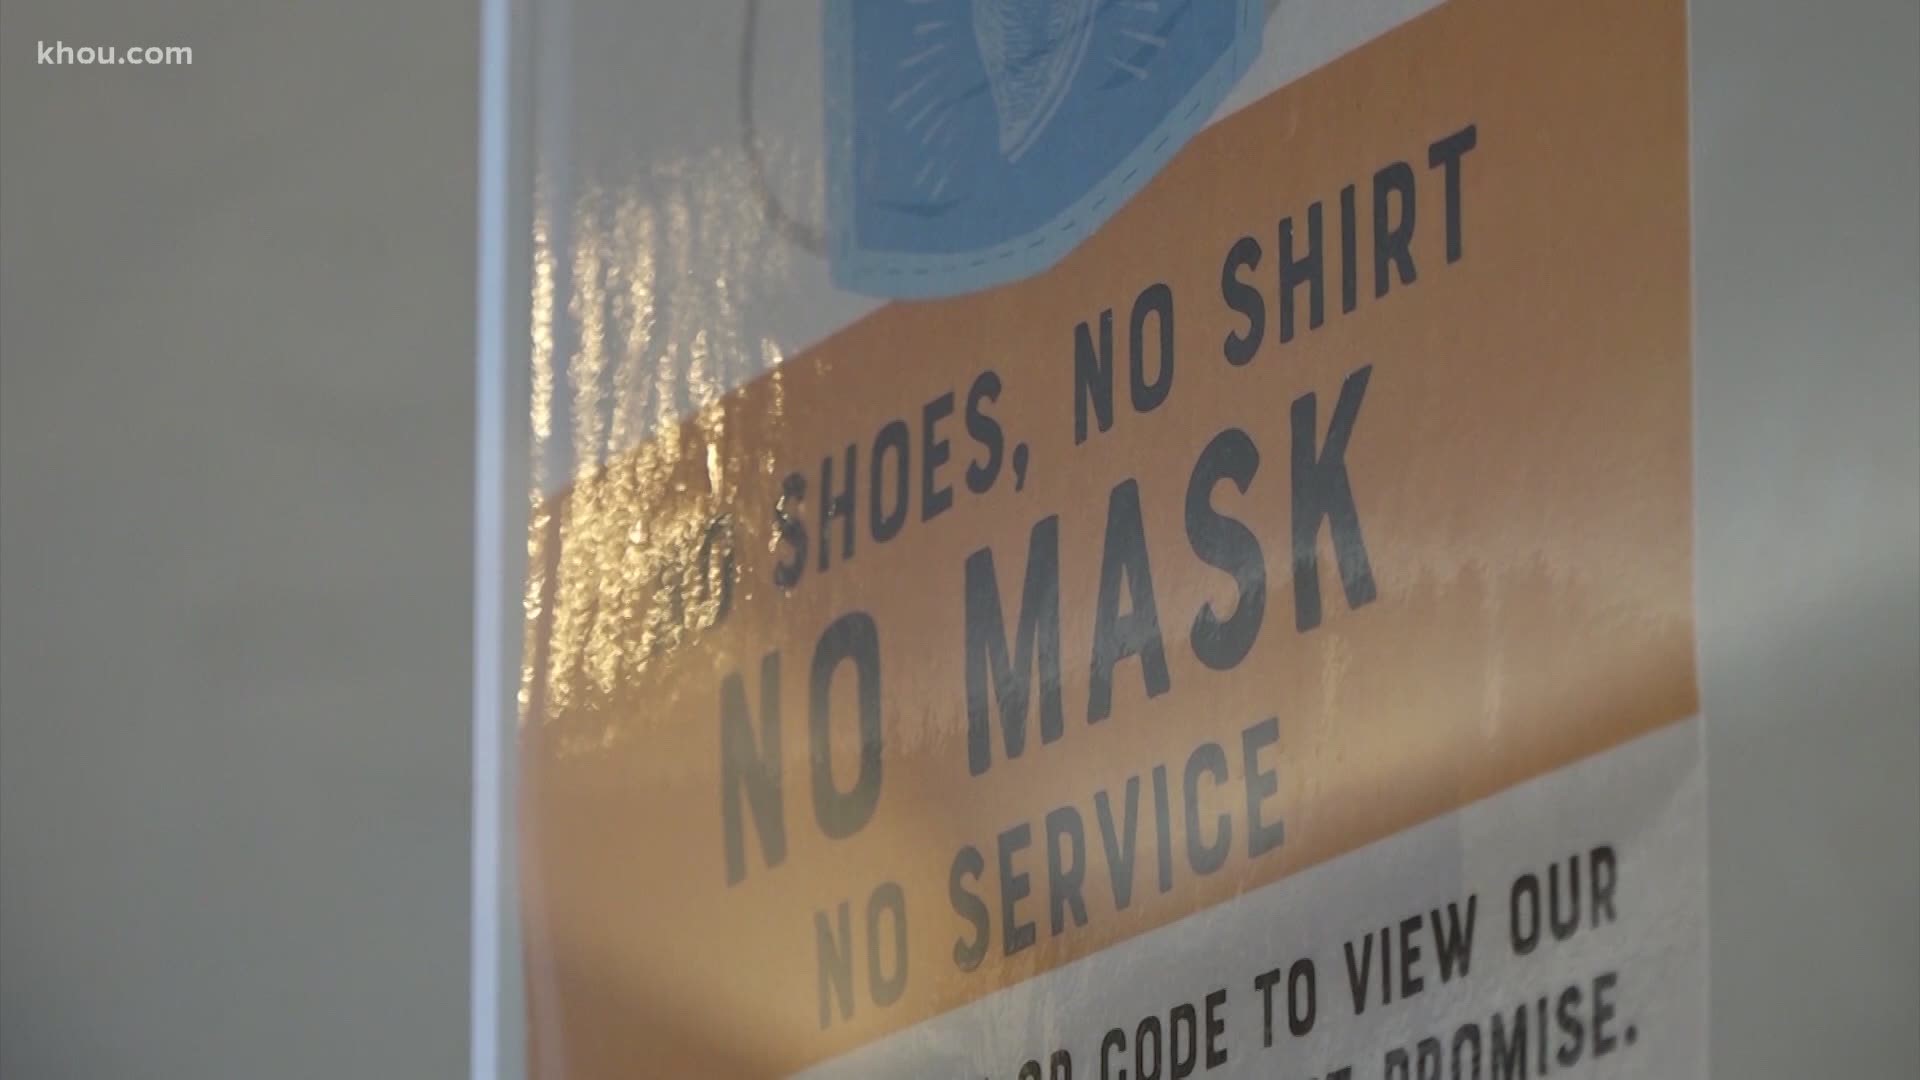 Starting Monday, Harris County will be under a new mask order, but it only applies to businesses.